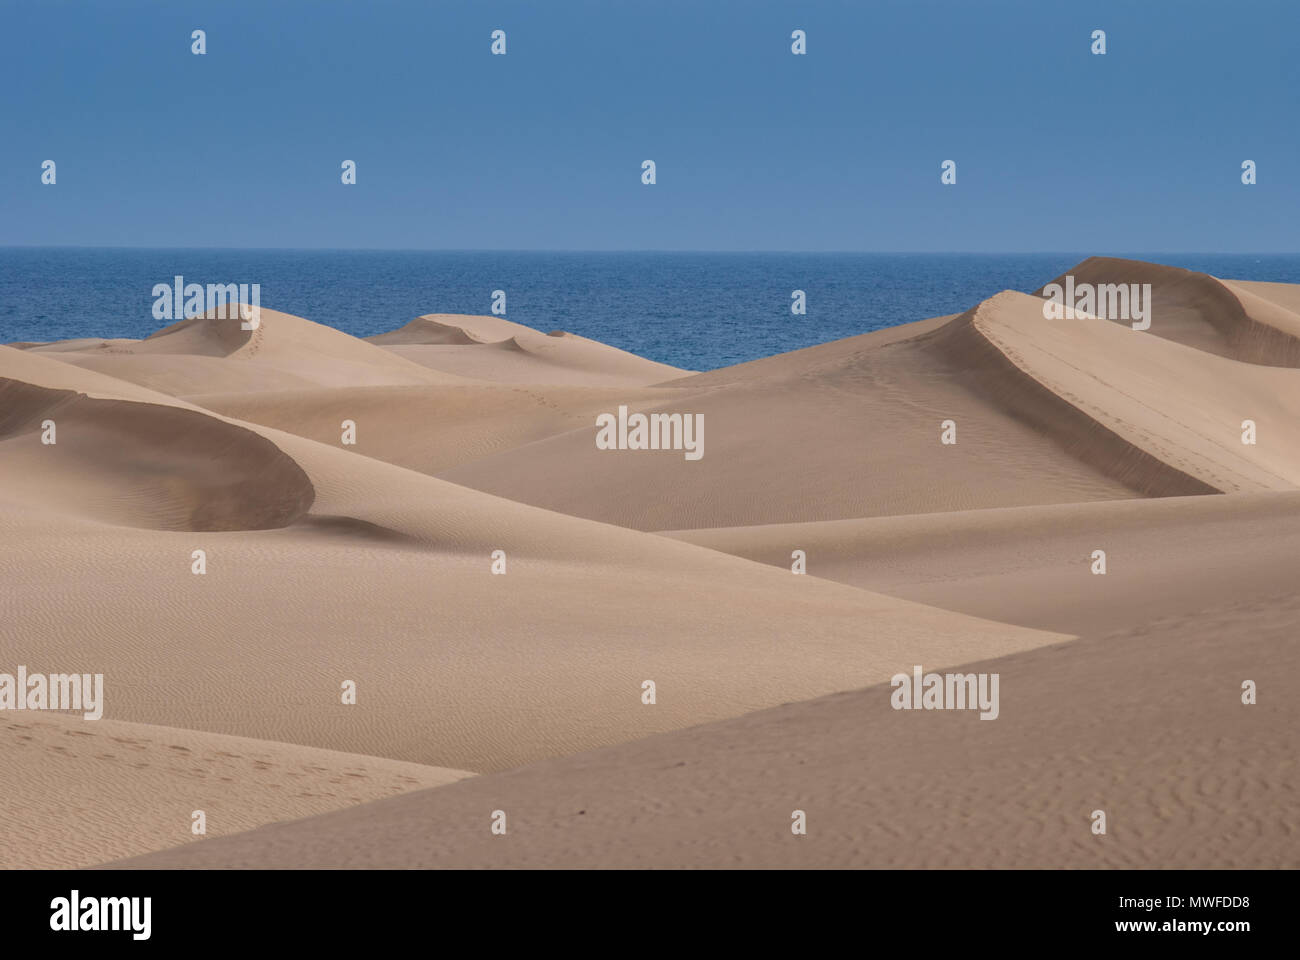 Dunes of Maspalomas with some footprints Stock Photo